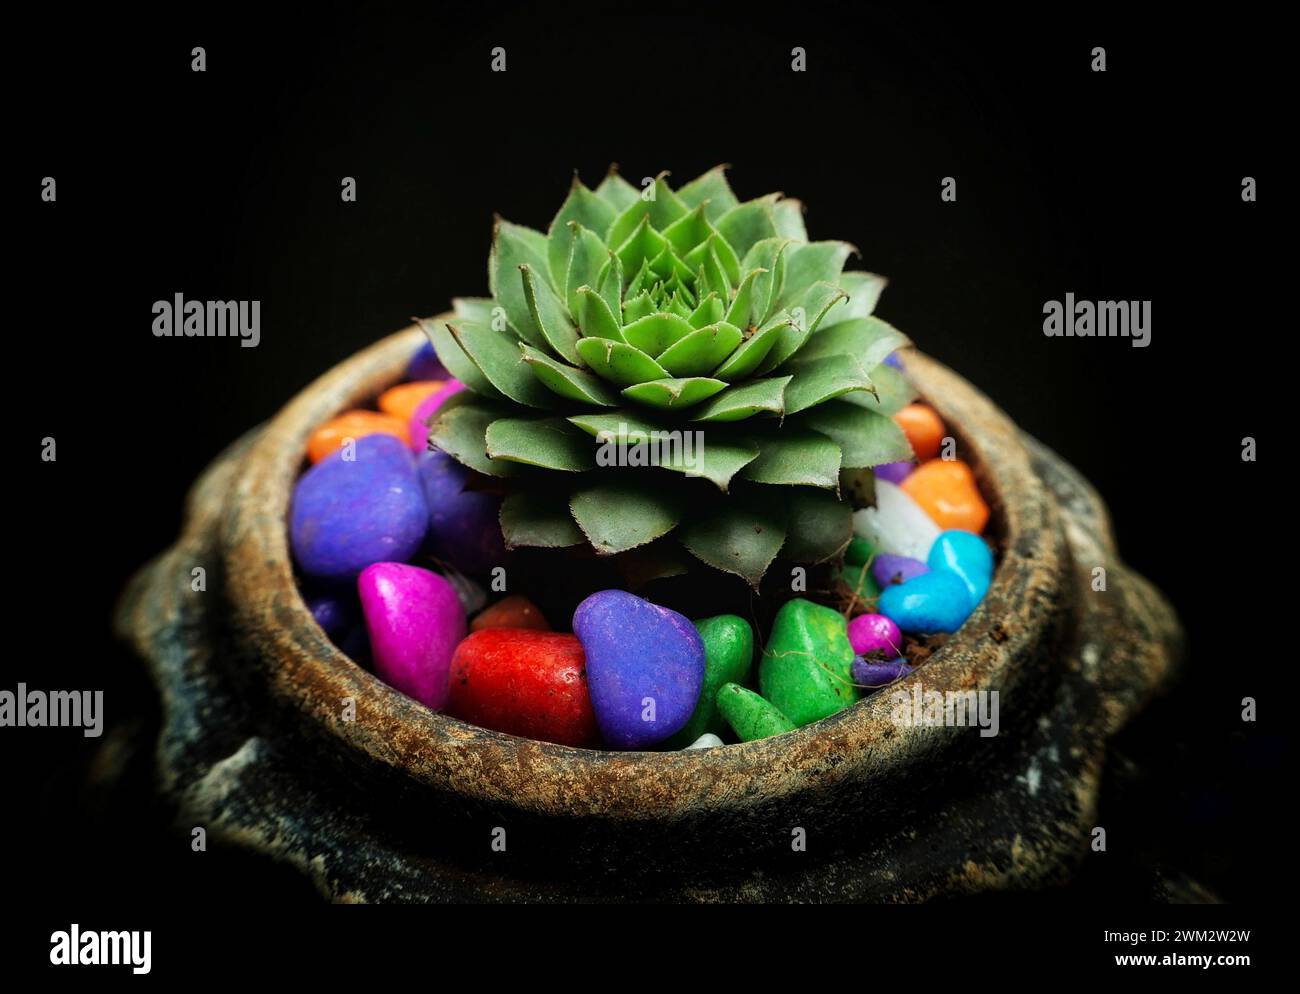 A tiny plant nestled among rocks, colorful stones, and a delicate flower Stock Photo